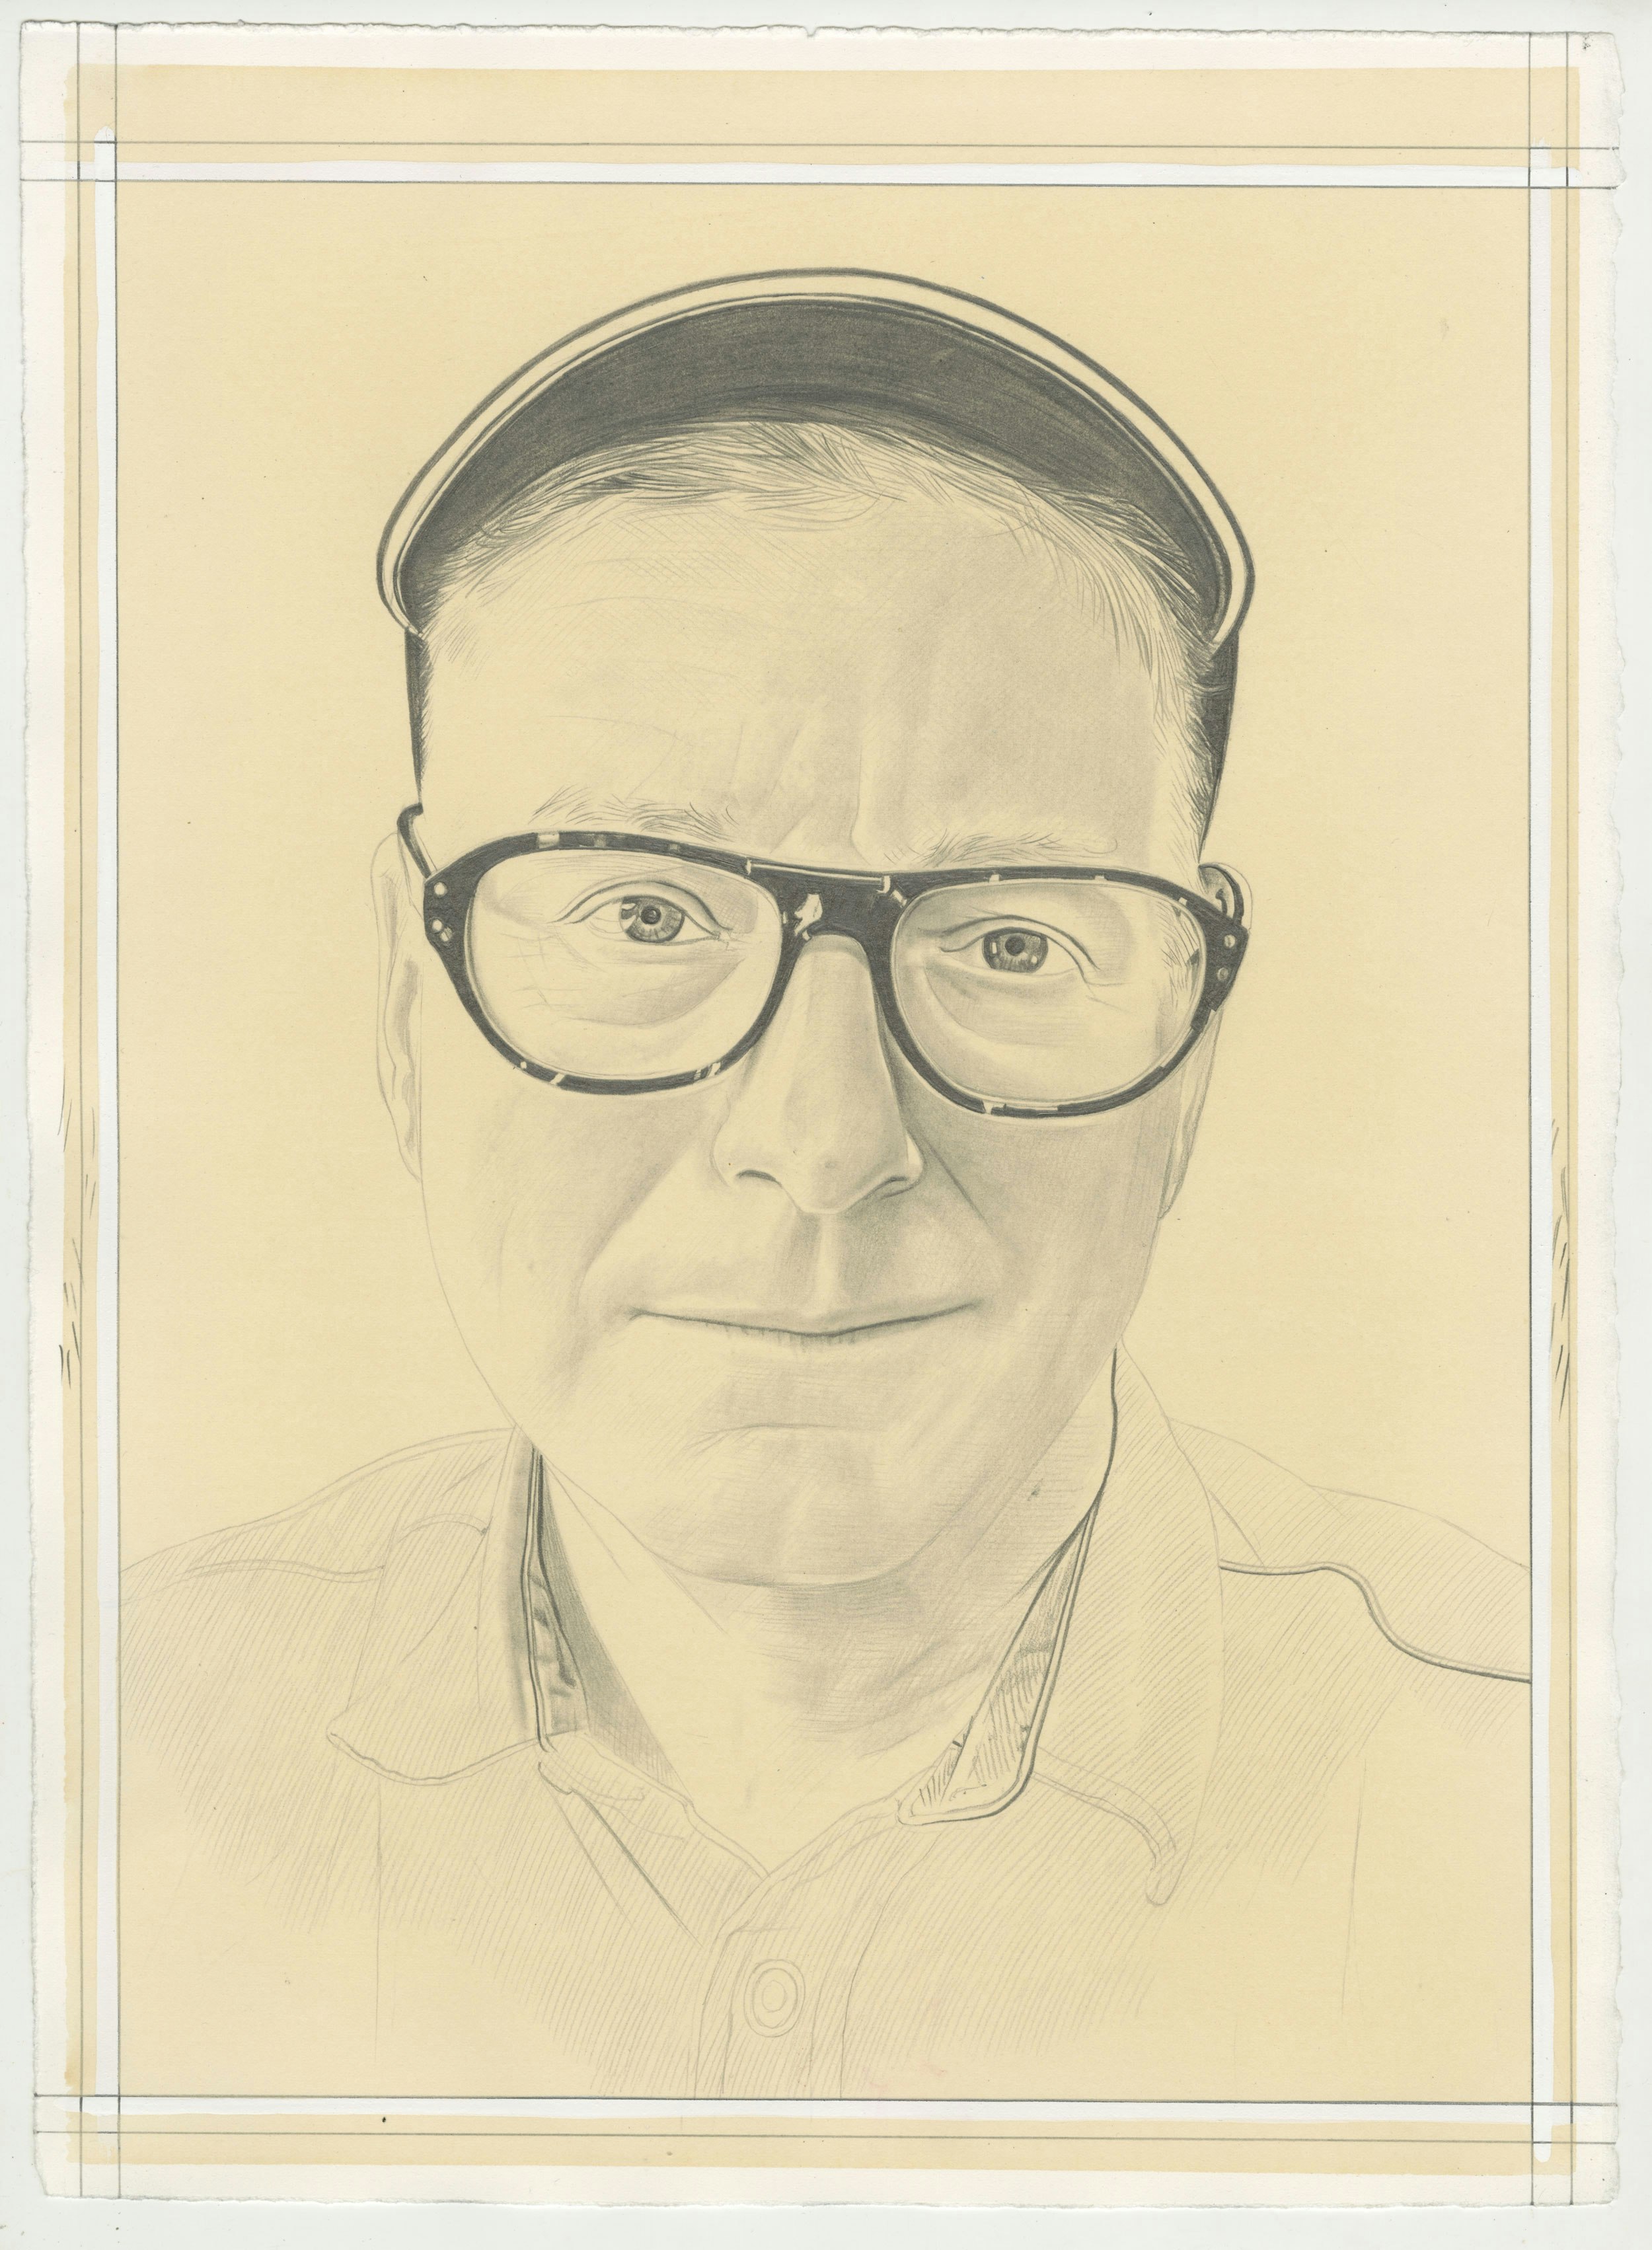 Portrait of Donald Moffett, pencil on paper by Phong Bui.